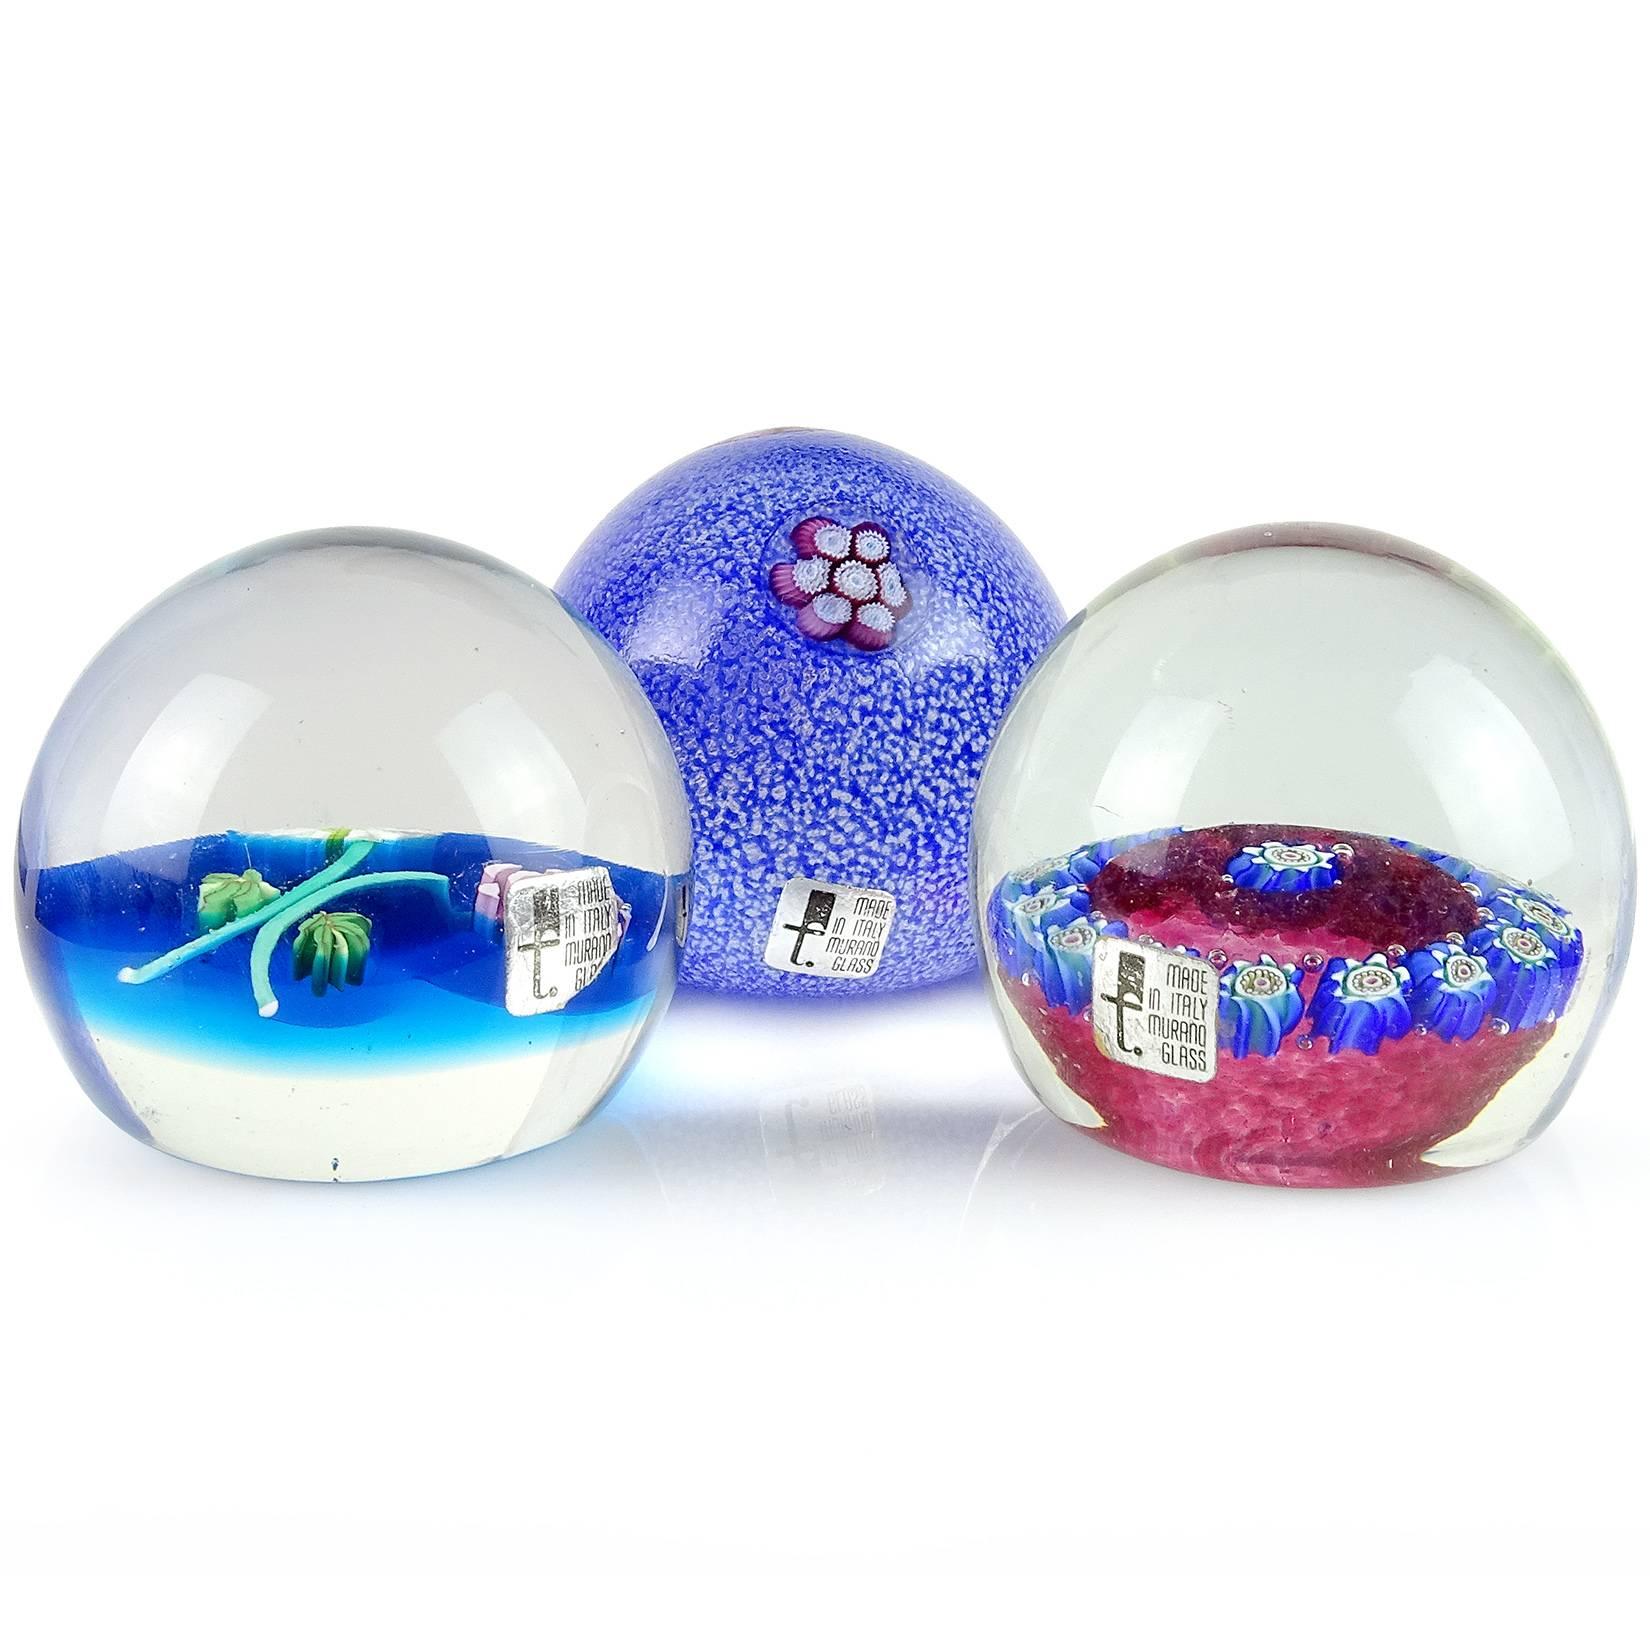 Priced per item (3 designs available). Beautiful vintage Murano hand blown flower design Italian art glass paperweights. Documented to the Fratelli Toso Company, all with original labels. Top paperweight has a melted overshot surface with purple and